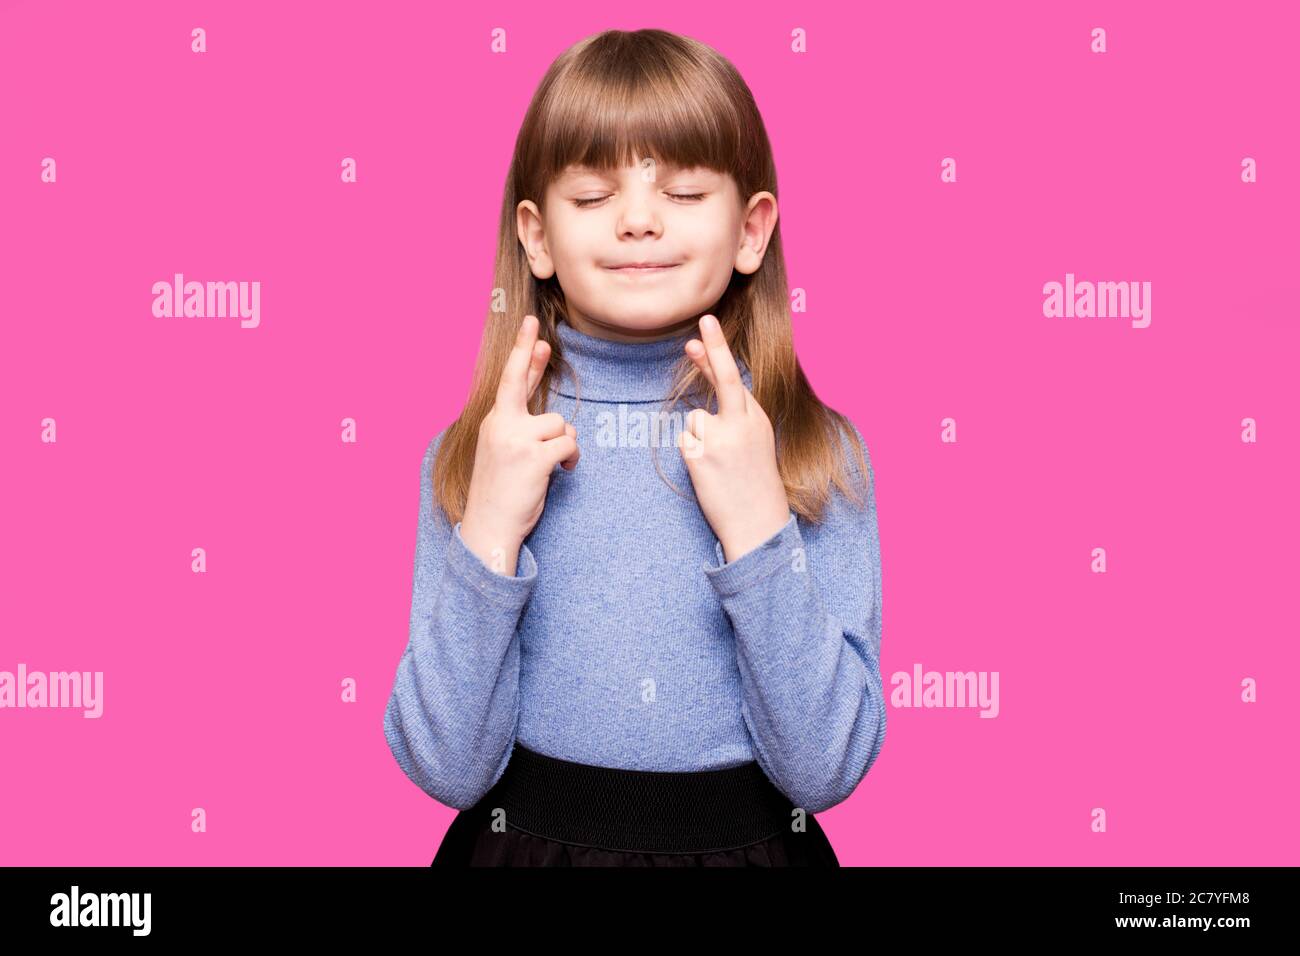 Funny little girl crossing fingers, hoping her wish come true, isolated on pink background. Portrait of small girl praying, wishing good luck or mirac Stock Photo